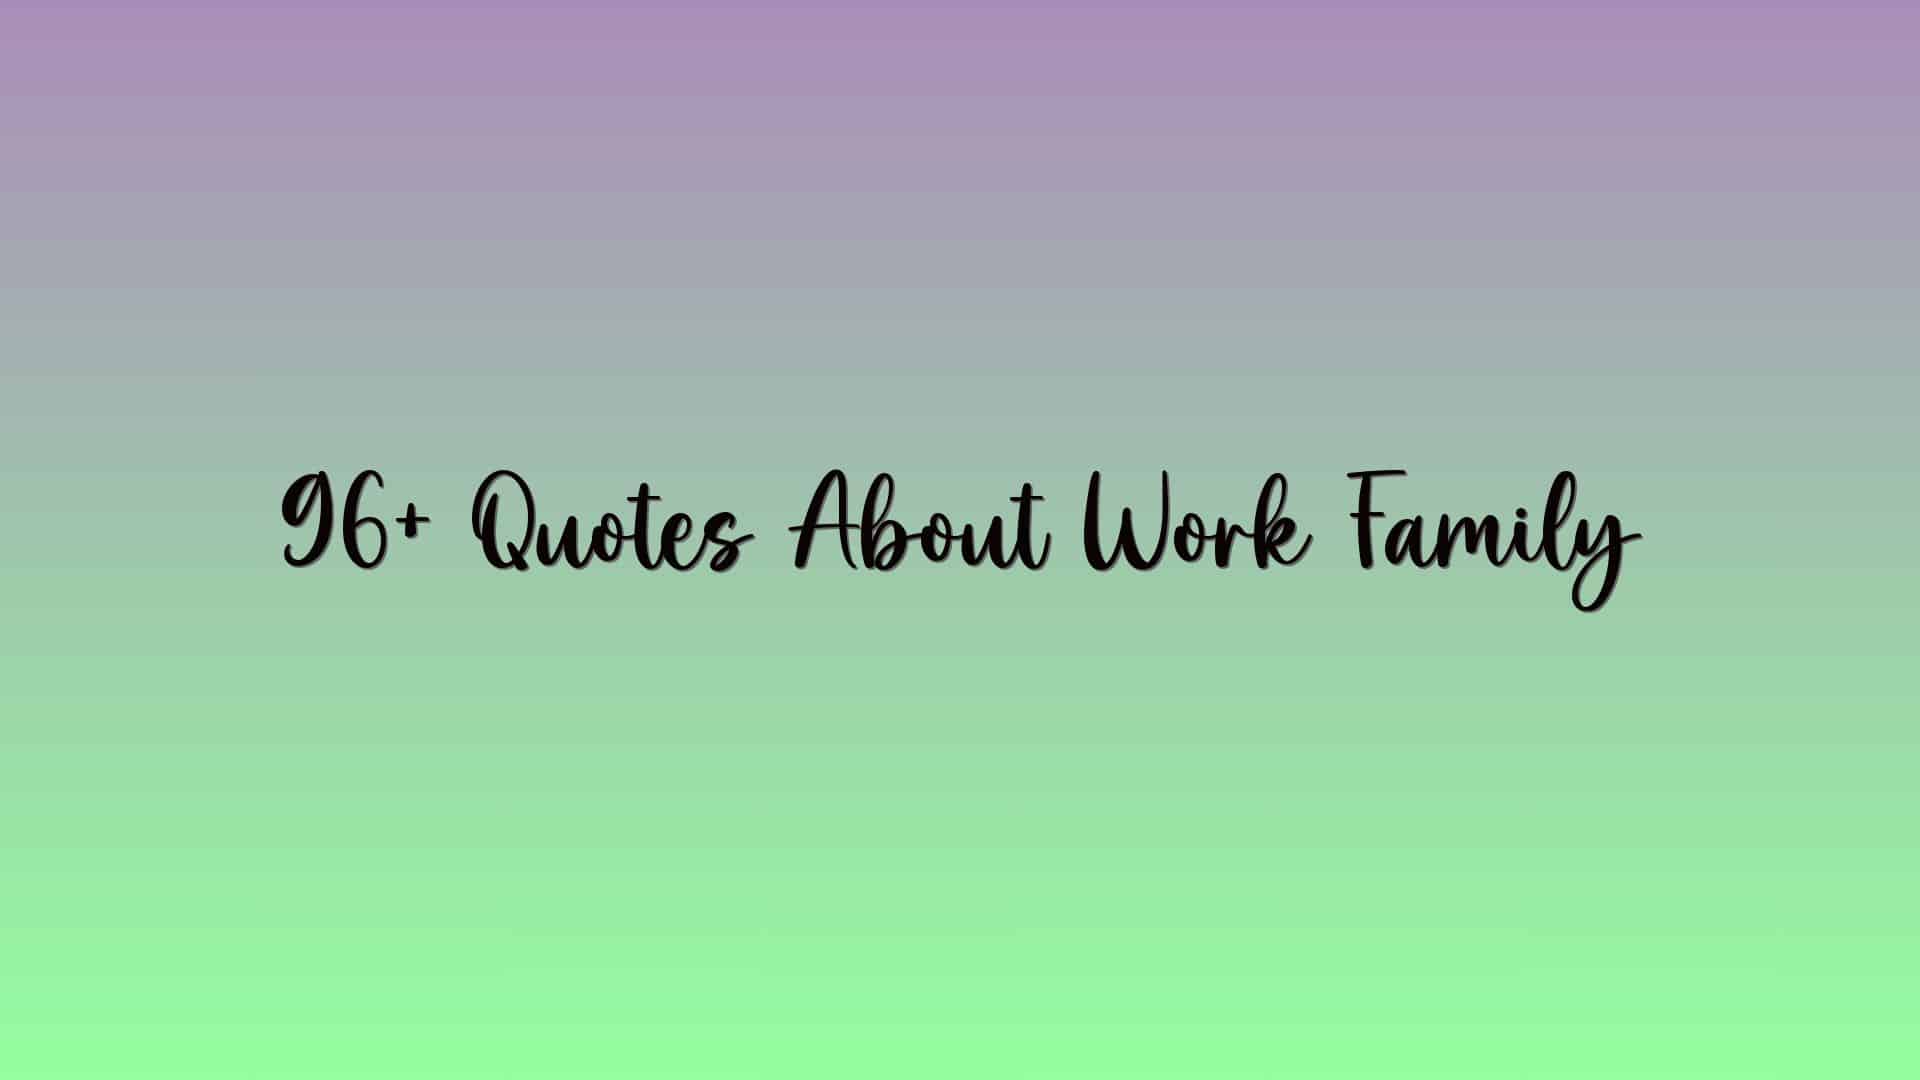 96+ Quotes About Work Family